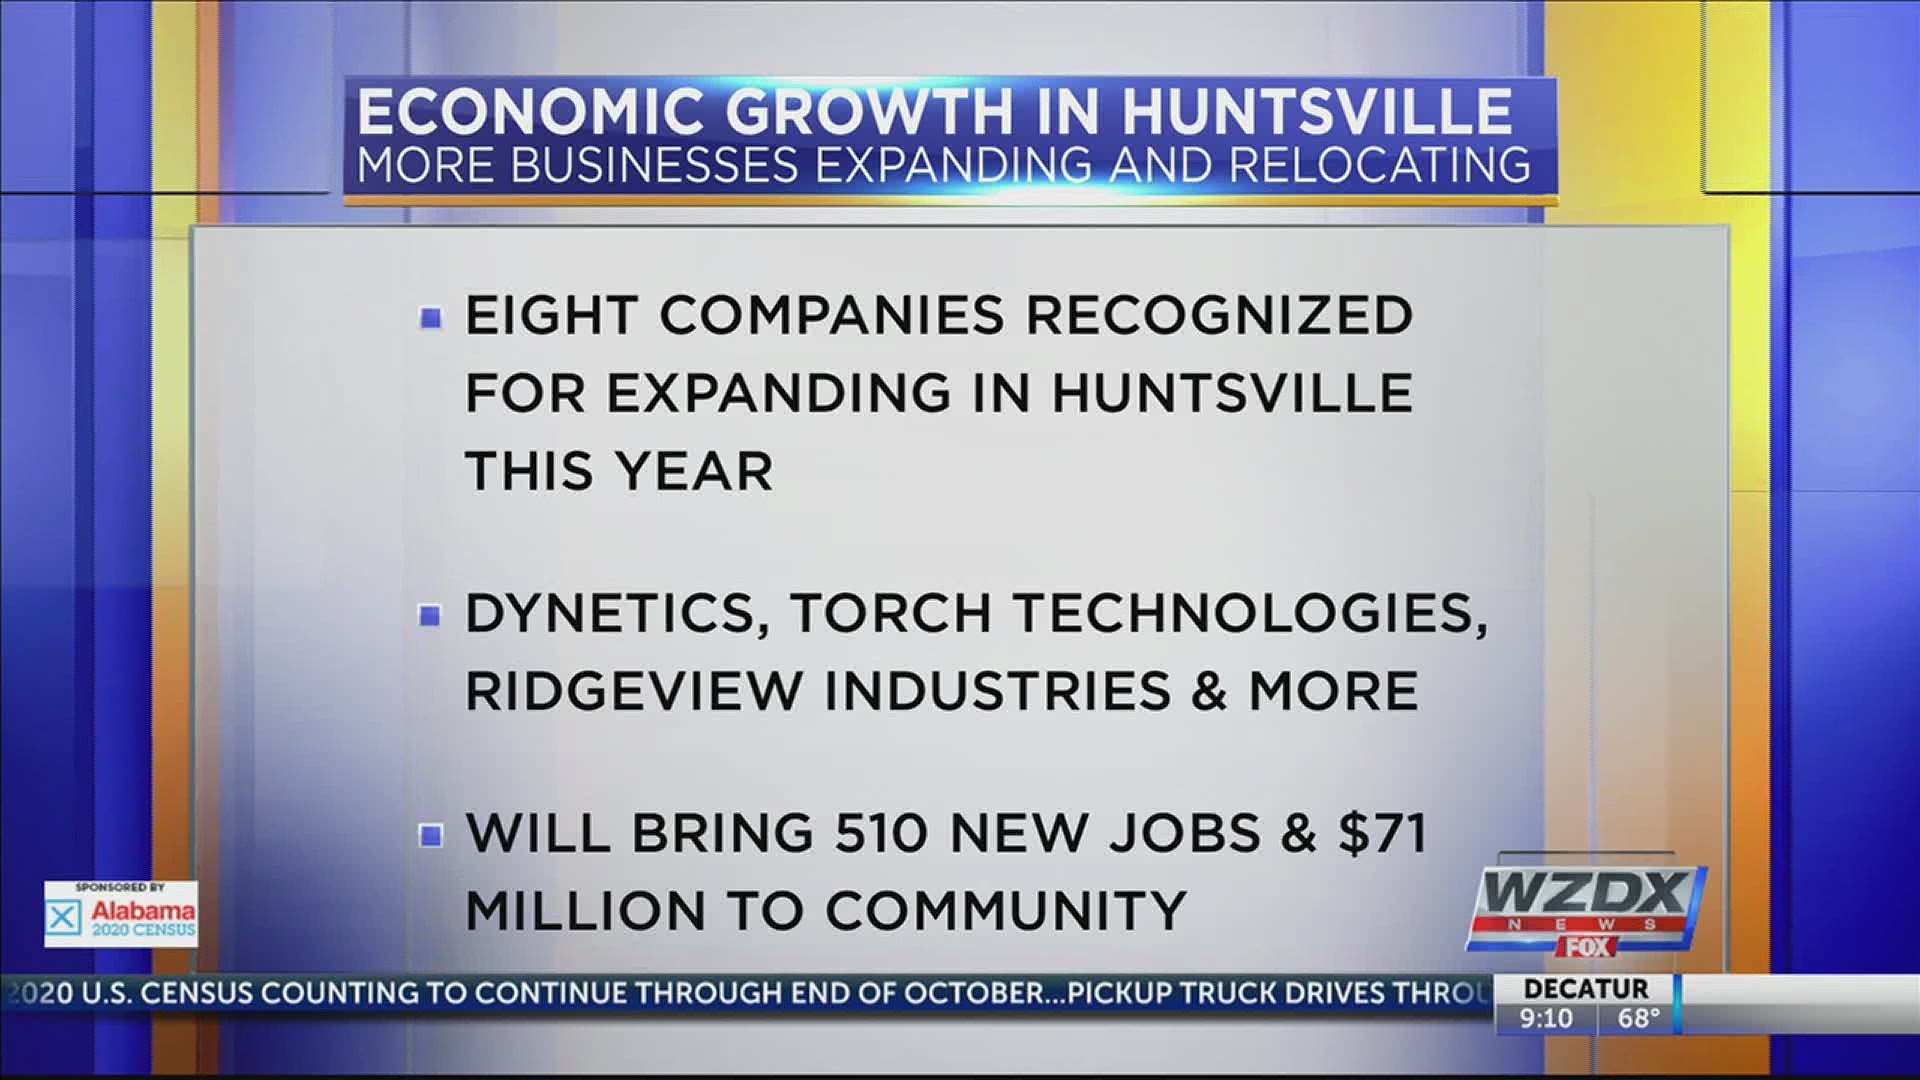 Huntsville/Madison County Chamber announced today 8 projects that have/will bring over 500 jobs to the area